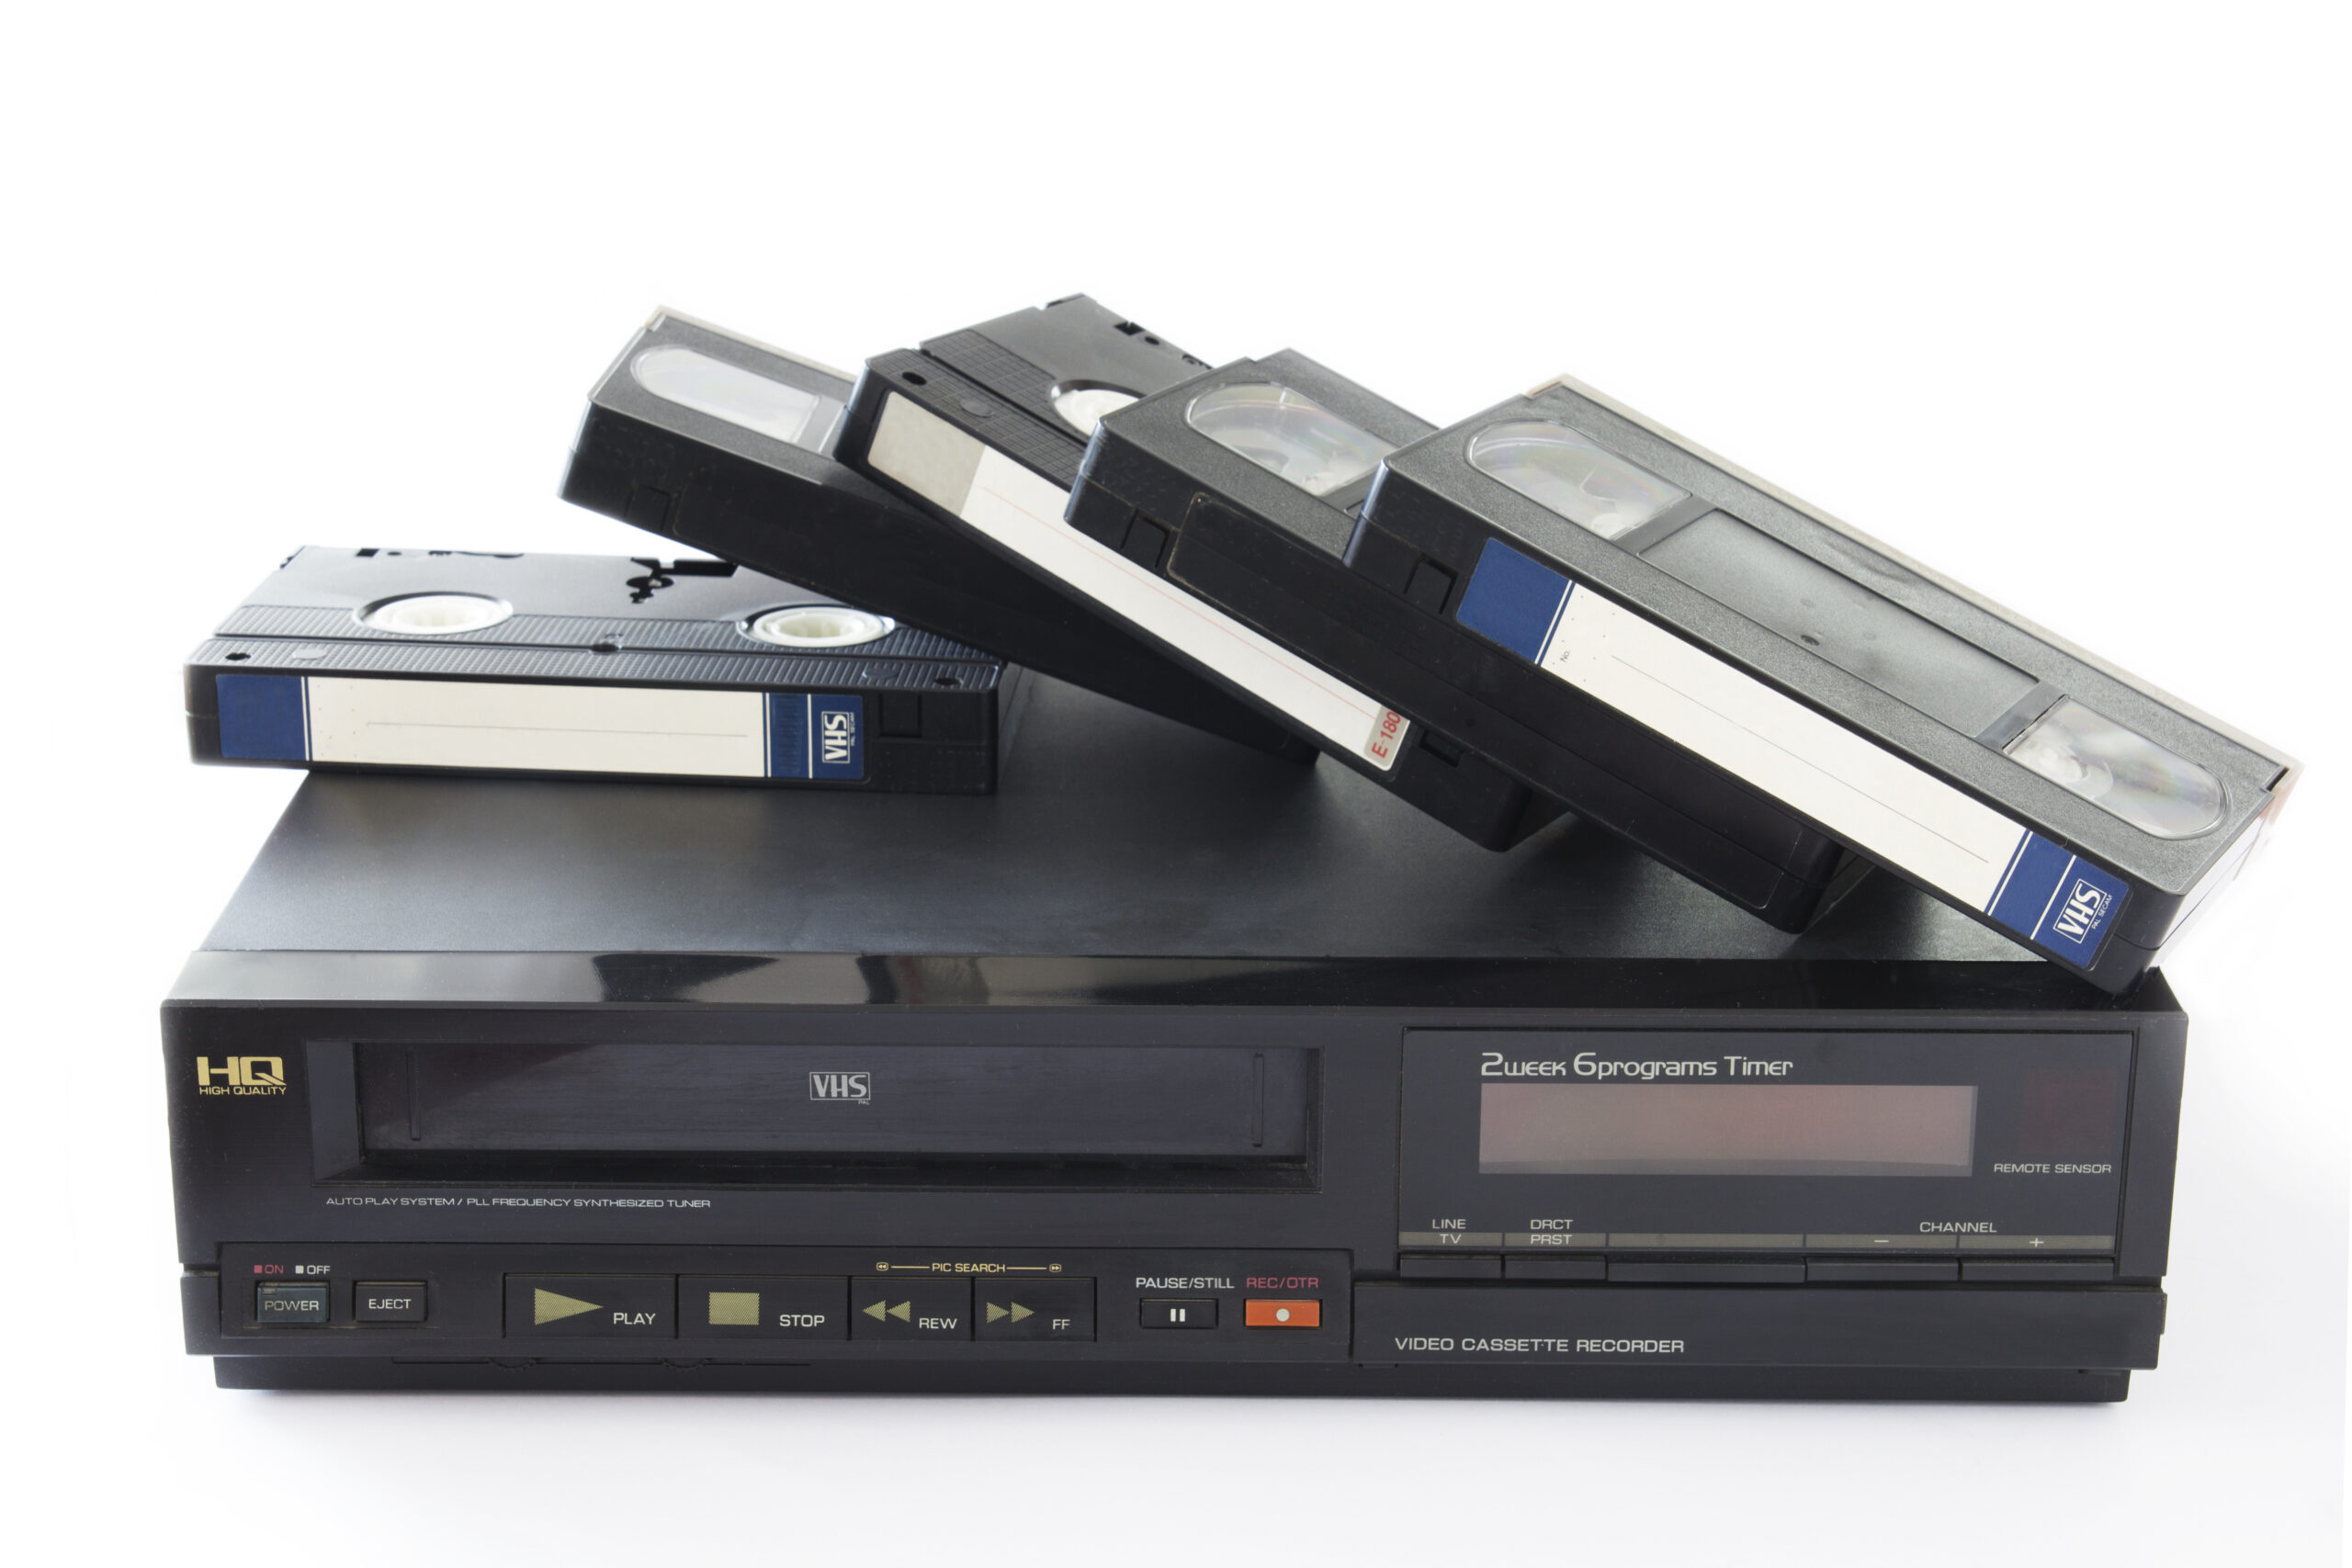 A Short History of the VCR (Video Cassette Recorder)